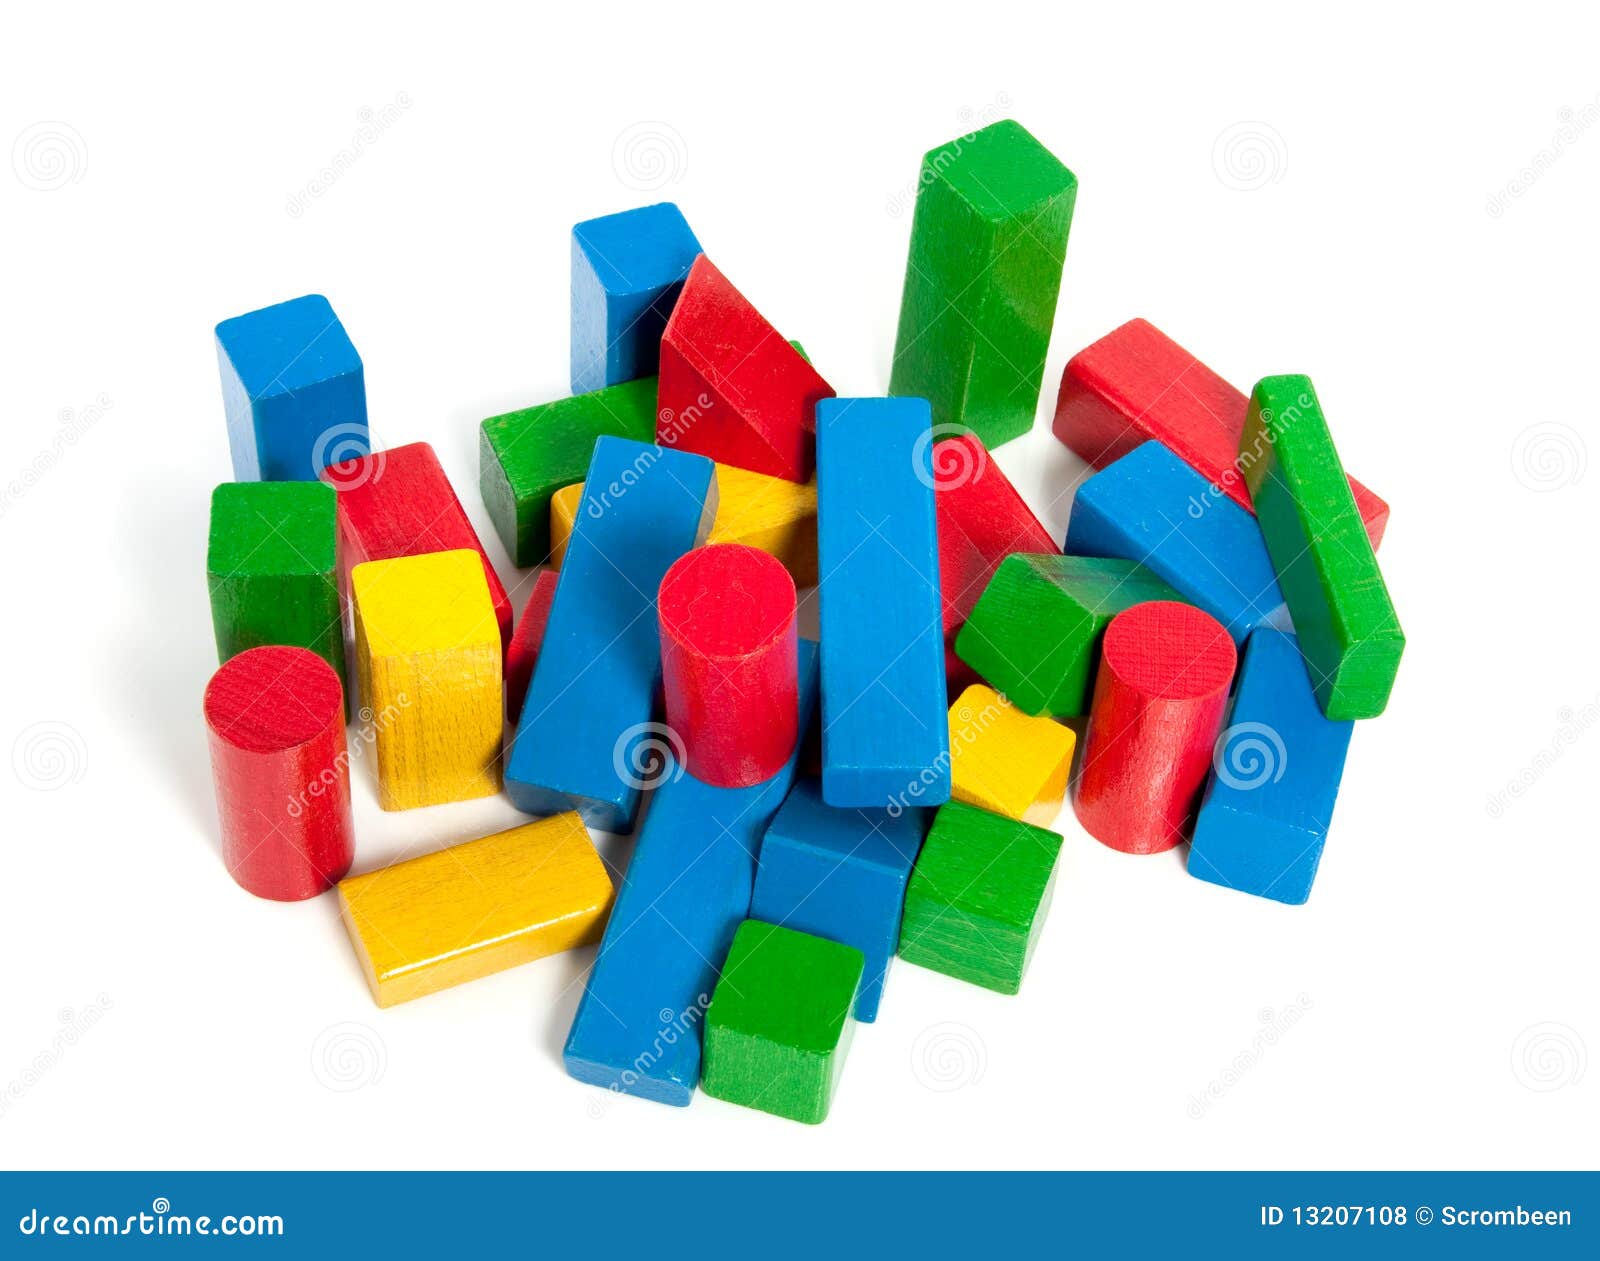 Colorful Wooden Play Blocks Stock Photo - Image of wooden, isolated